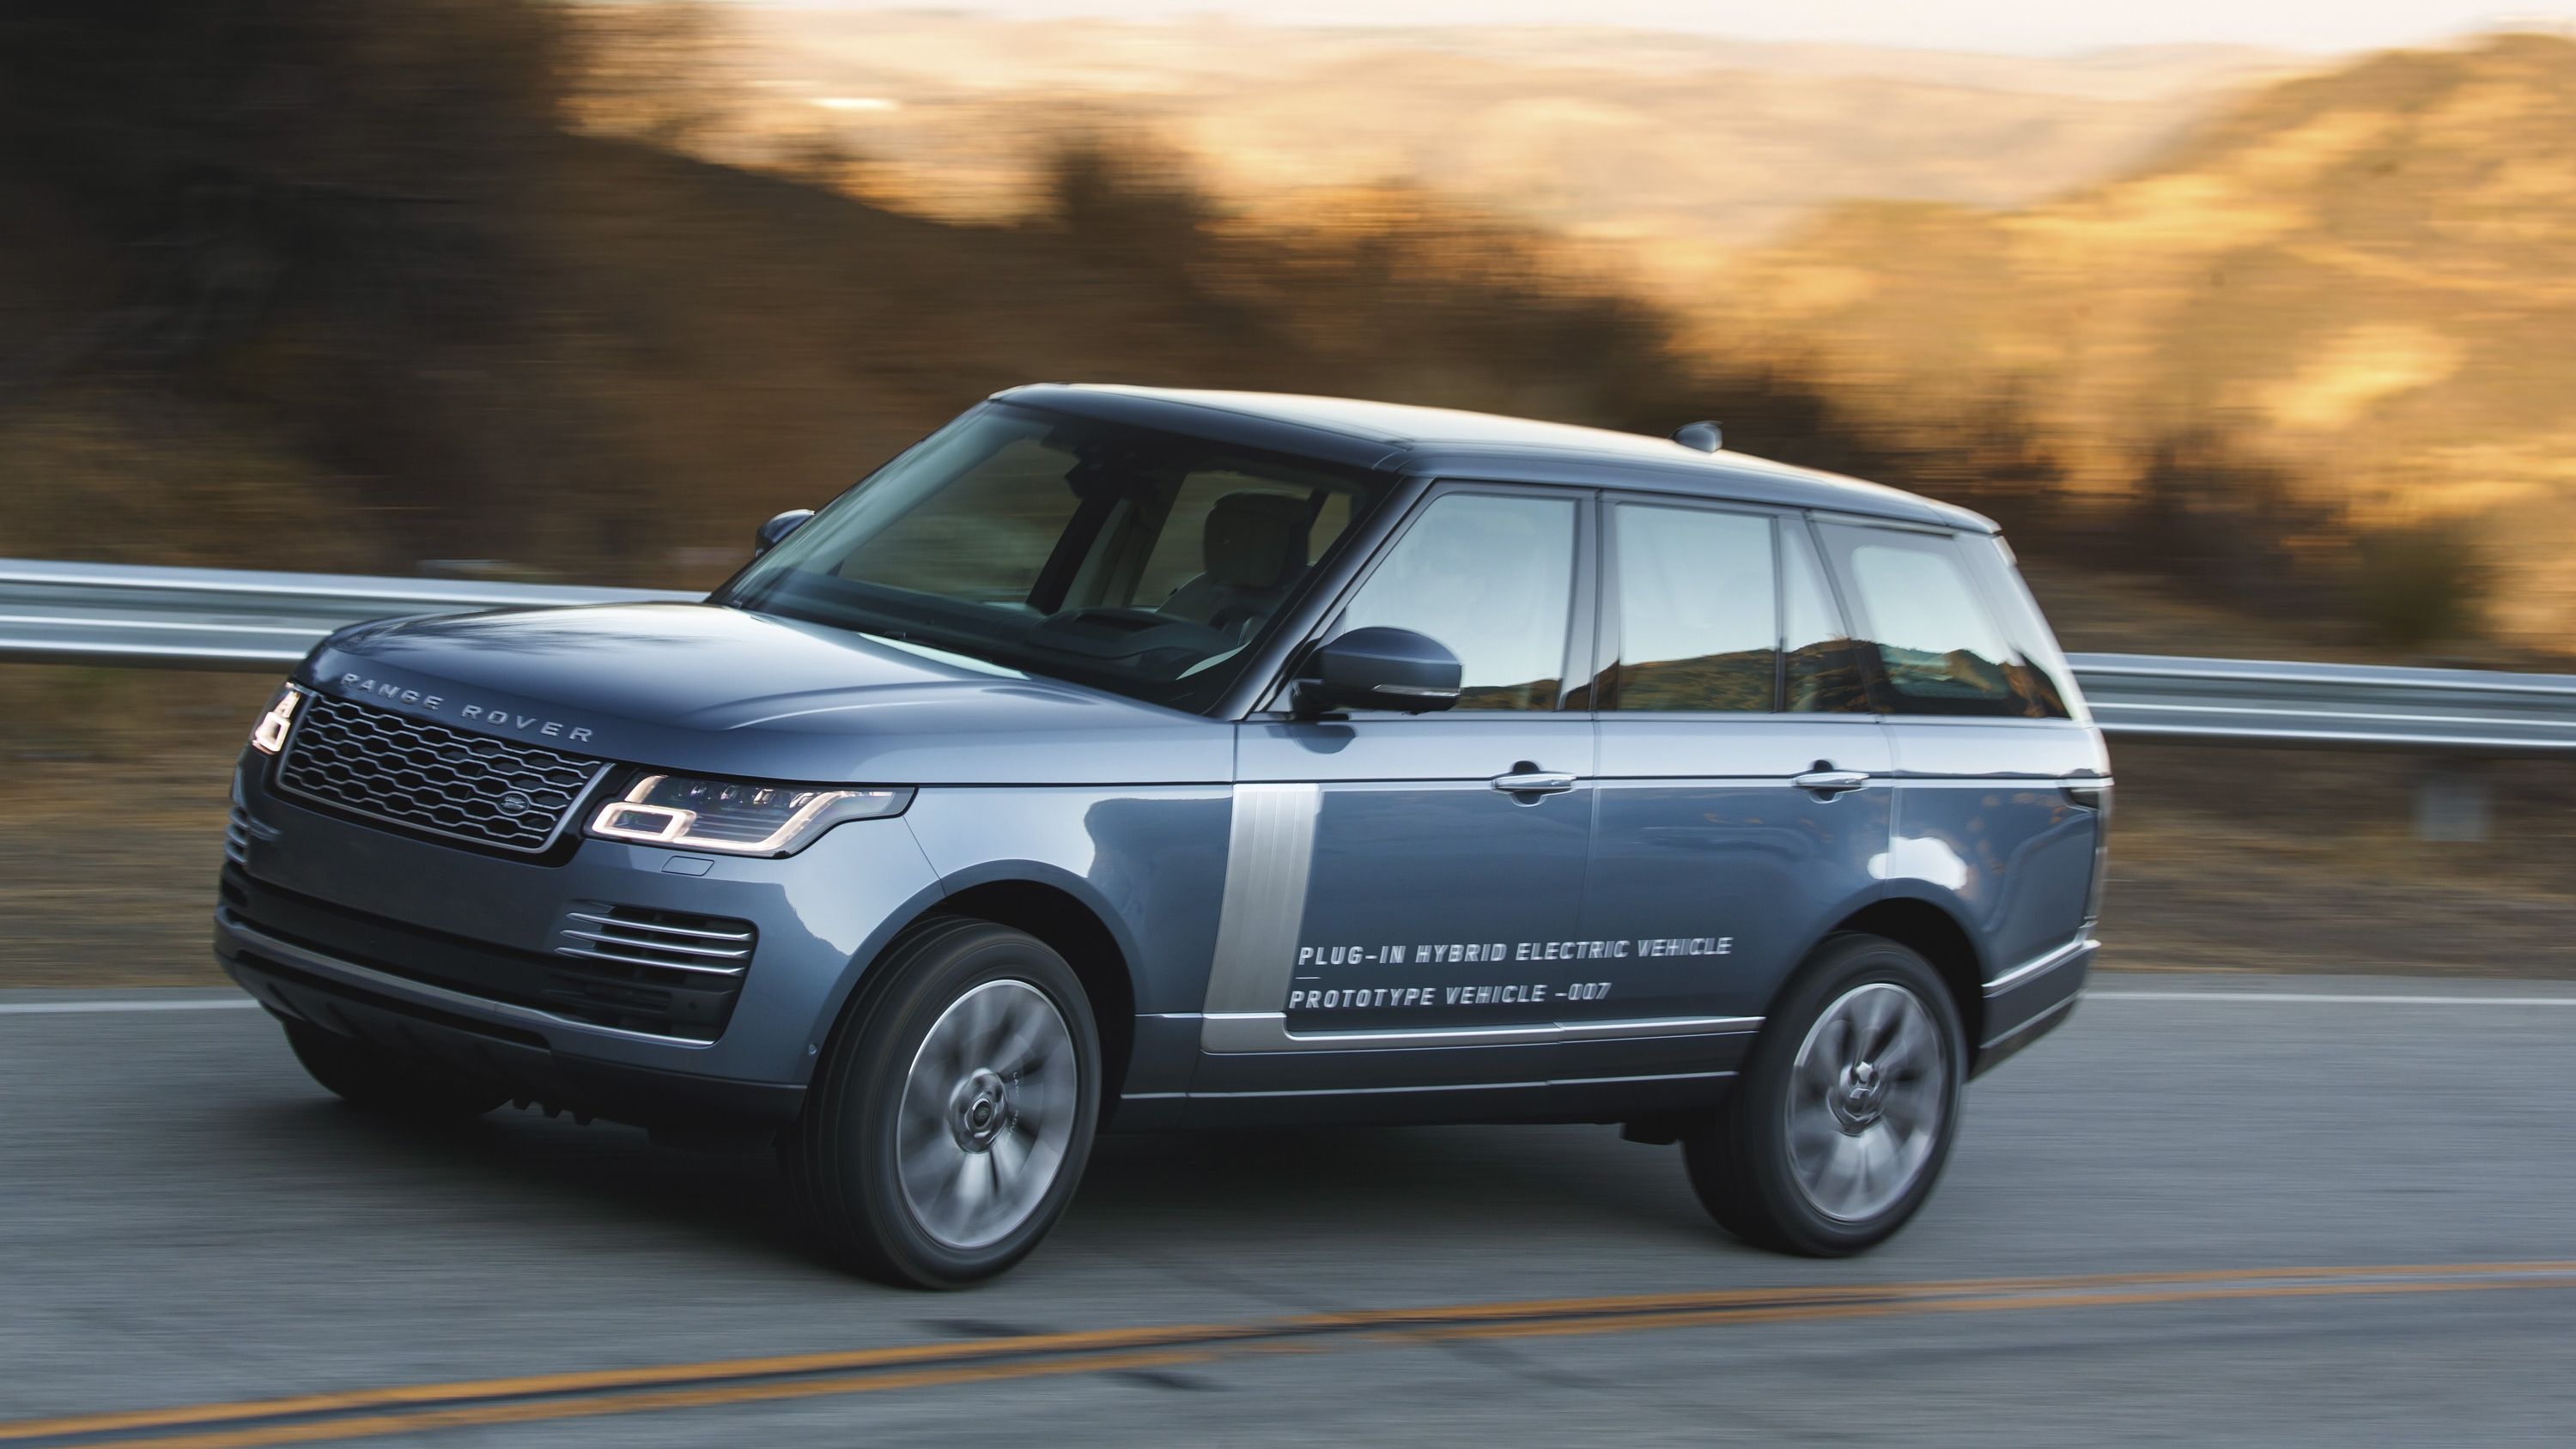 2018 The Range Rover Sport P400e Plug-In Hybrid Can Drive Using Electricity Alone